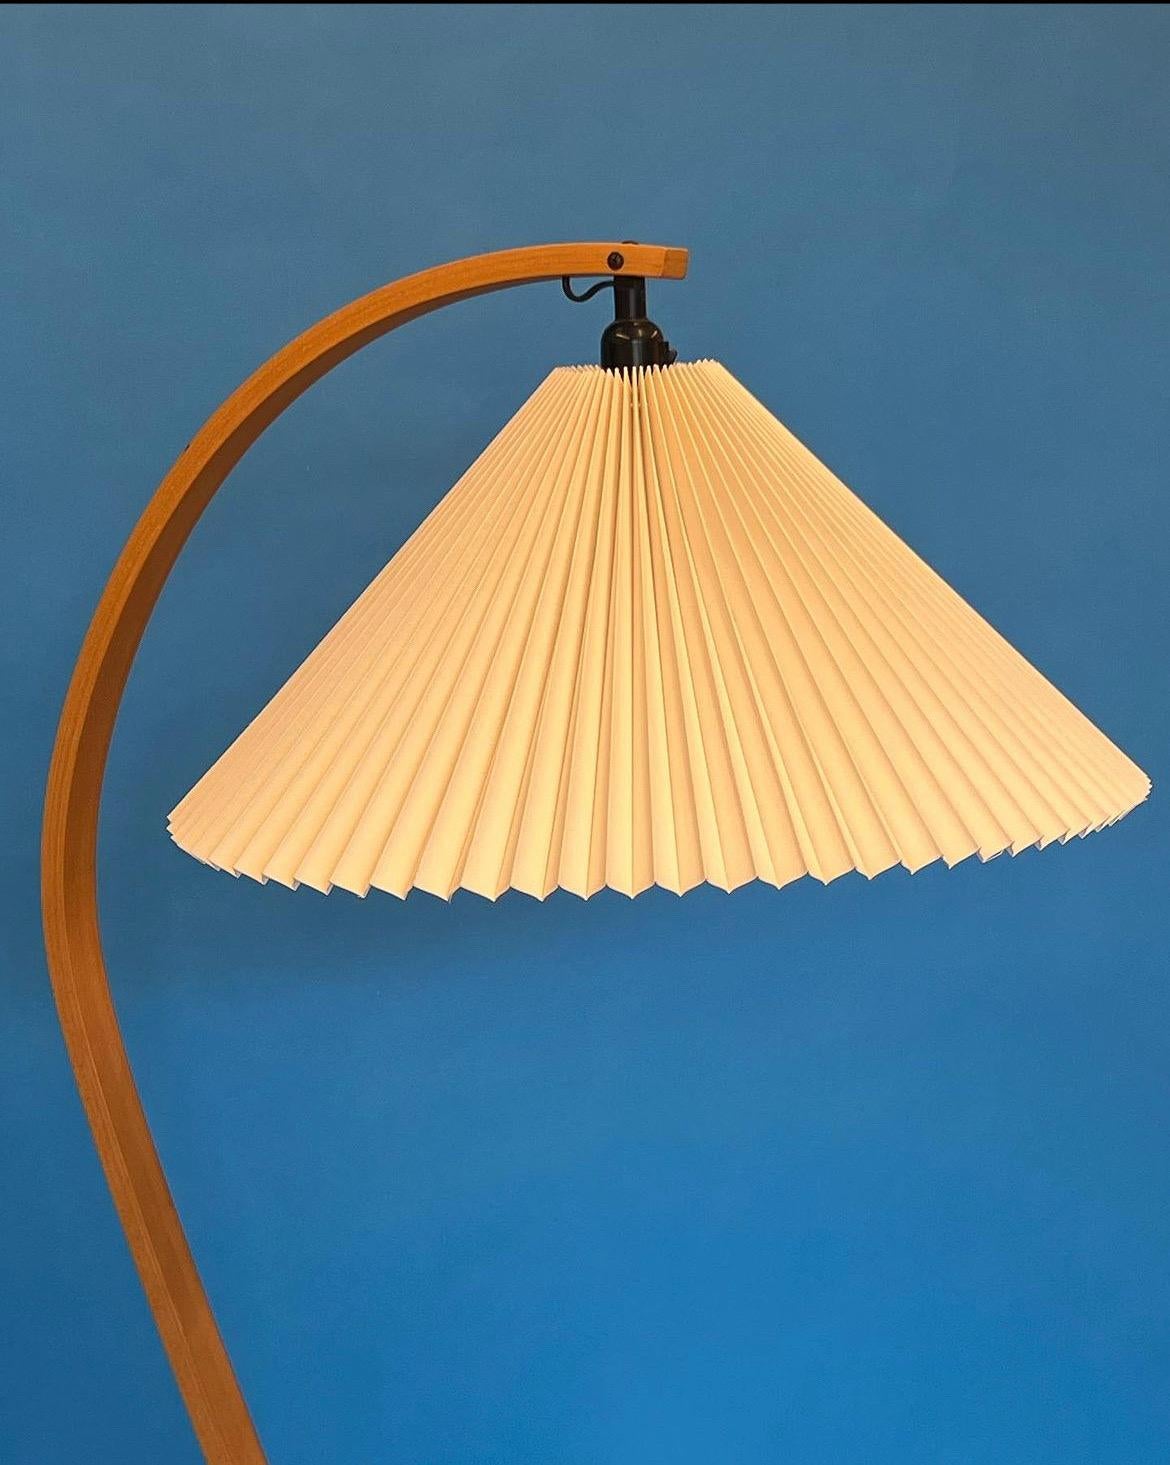 Floor lamp designed by Caprani Light AS, circa 1970s. Lamp features a beautiful bentwood beech stem, cast iron crescent base, and pleated off-white linen shade. The socket is equipped with on/off switch right above the top of the shade. The Caprani